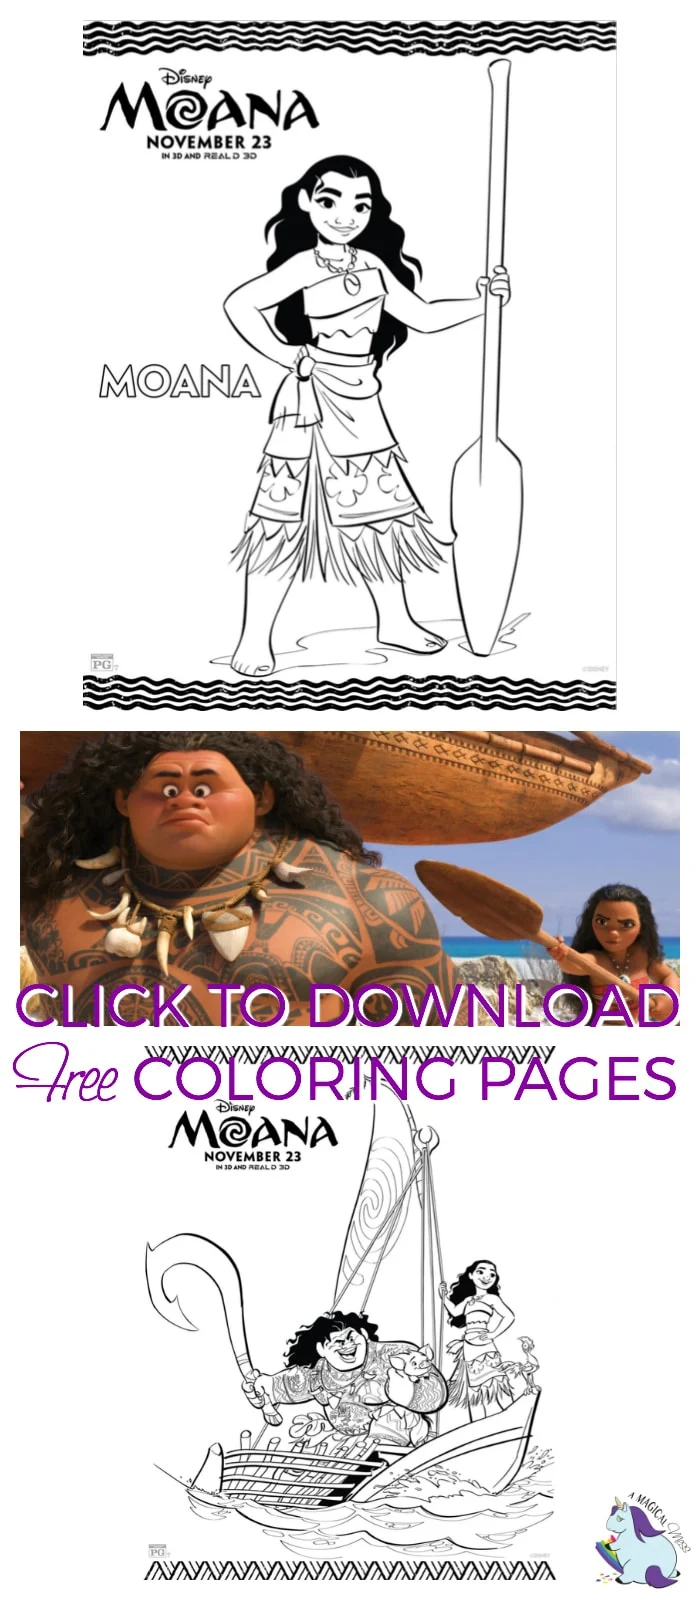 Free Disney Coloring Pages - Full Moana Coloring Packet!